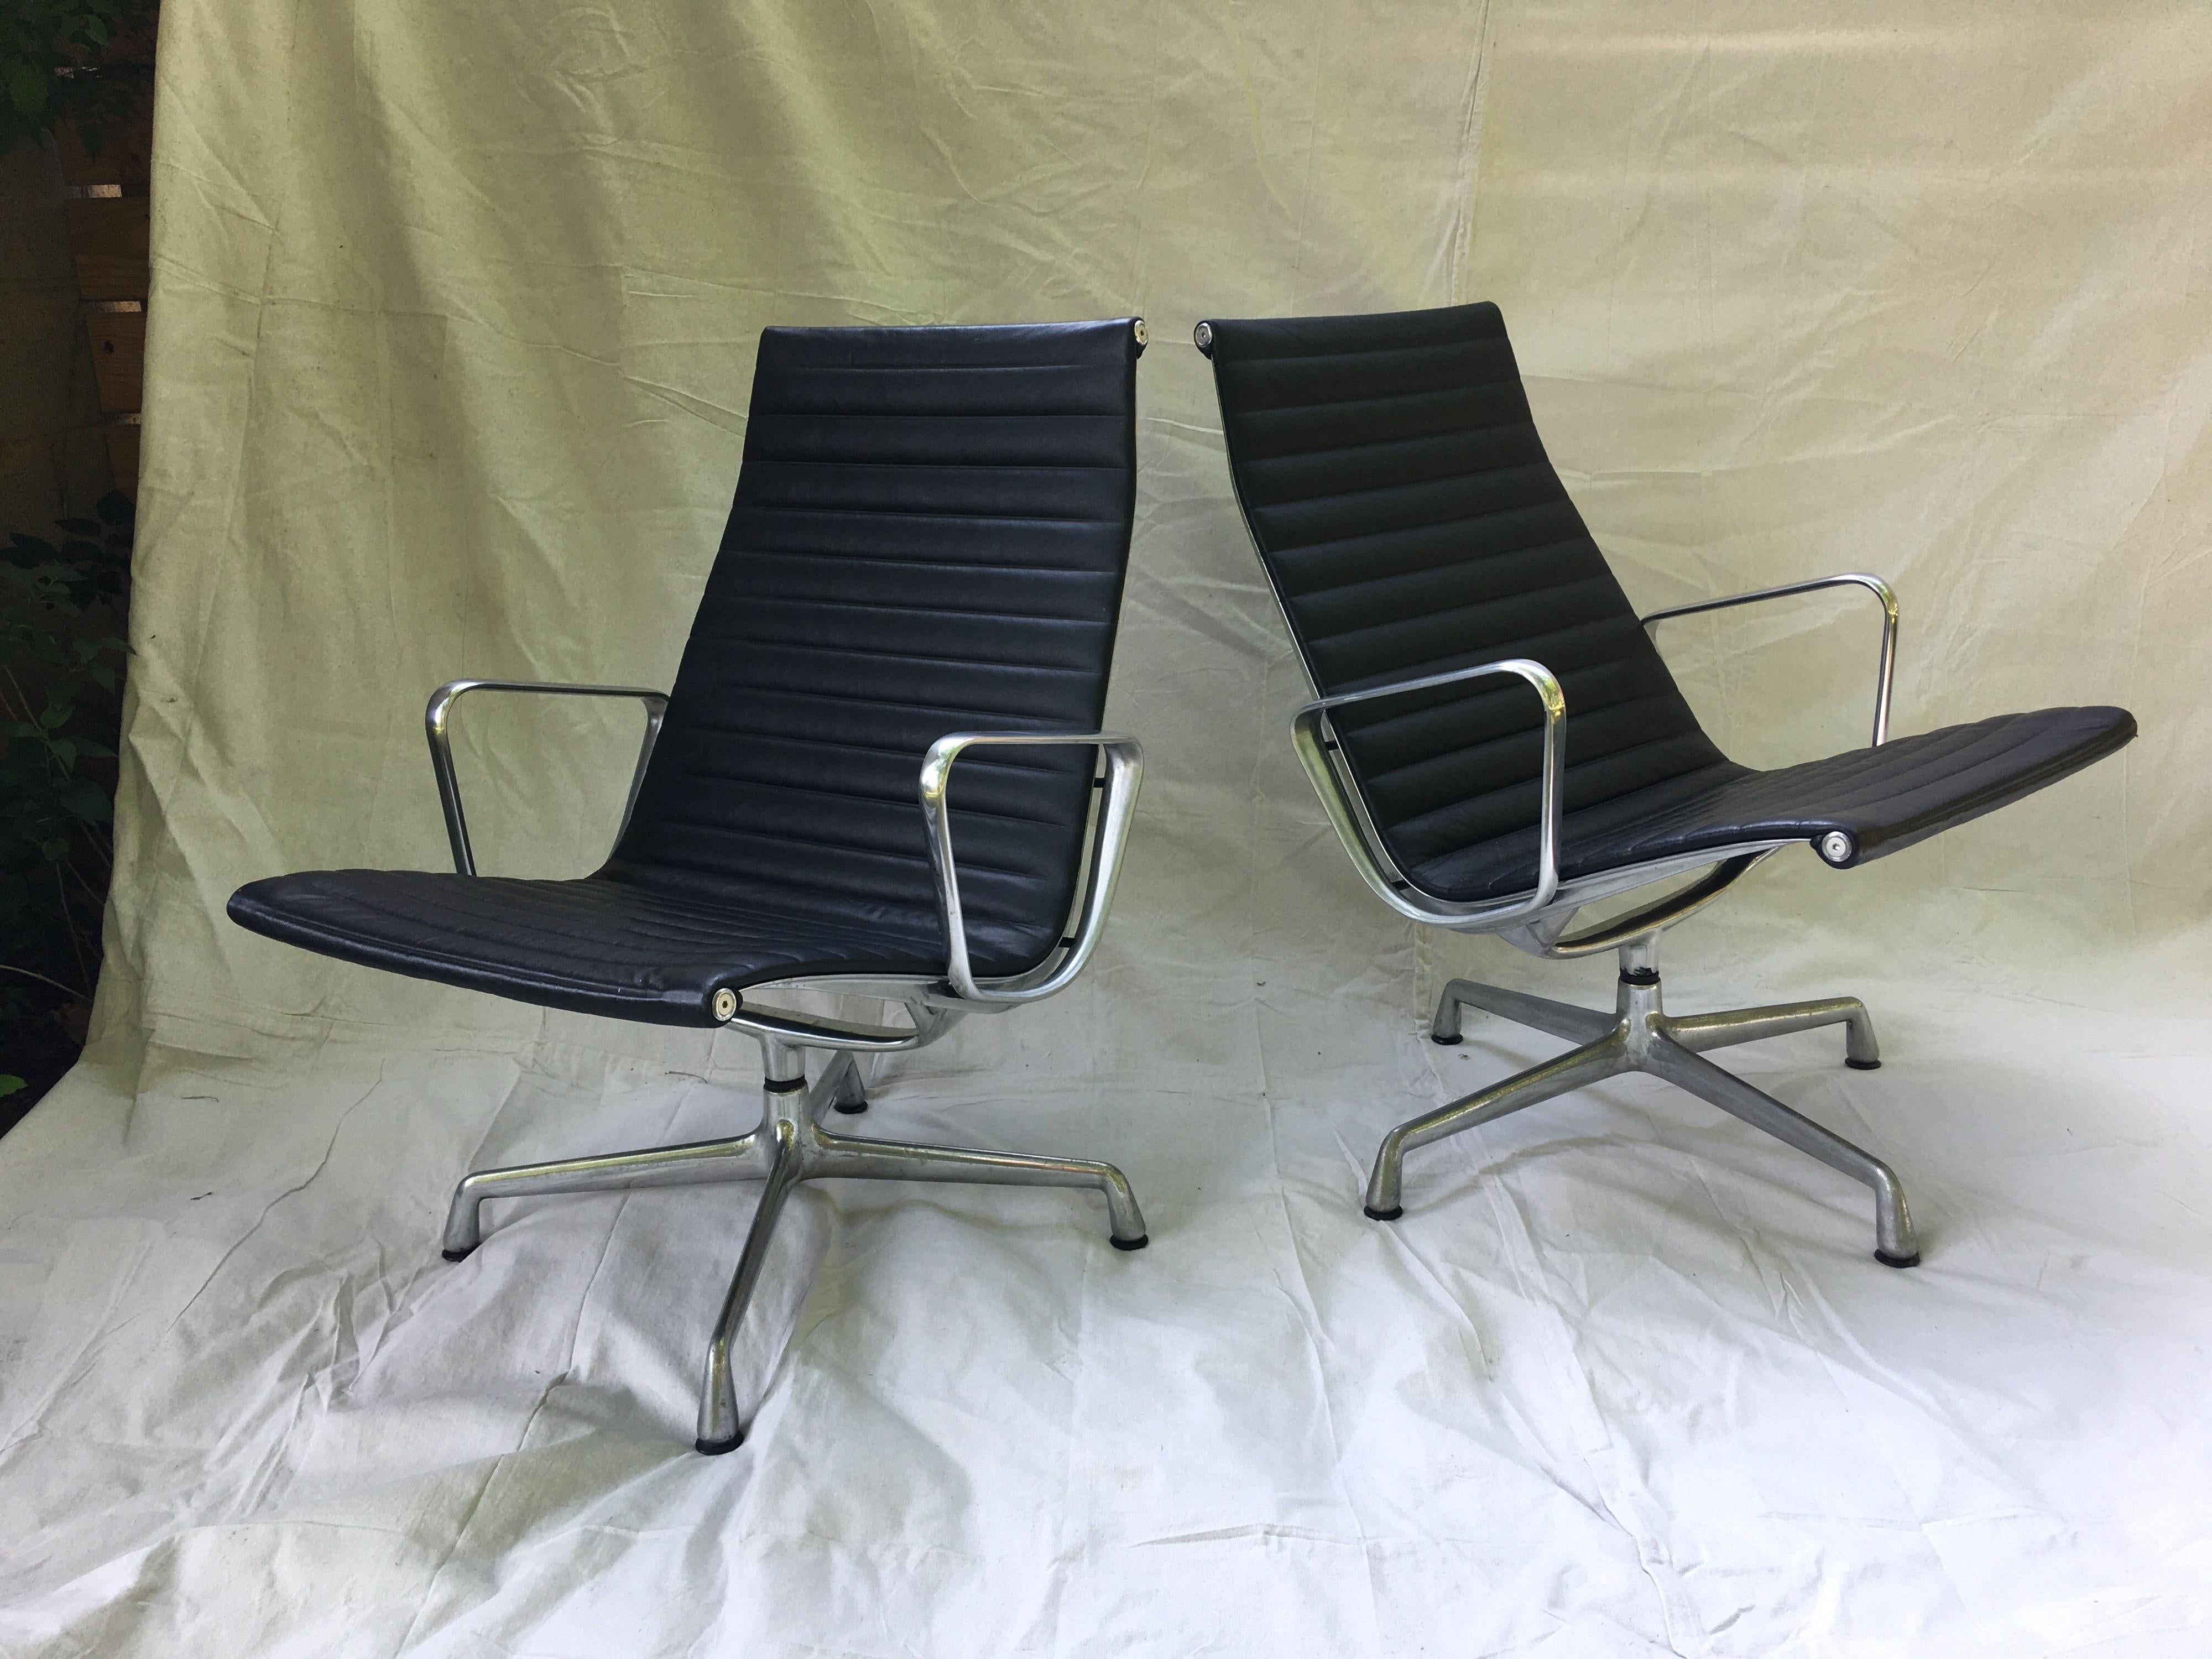 Pair of Eames aluminum group leather lounge chairs. Very nice to find a pair in Leather, usually fabric or vinyl! Very clean with minimal wear! Very comfy, chairs swivel, aluminum arms are clean showing minimal wear.